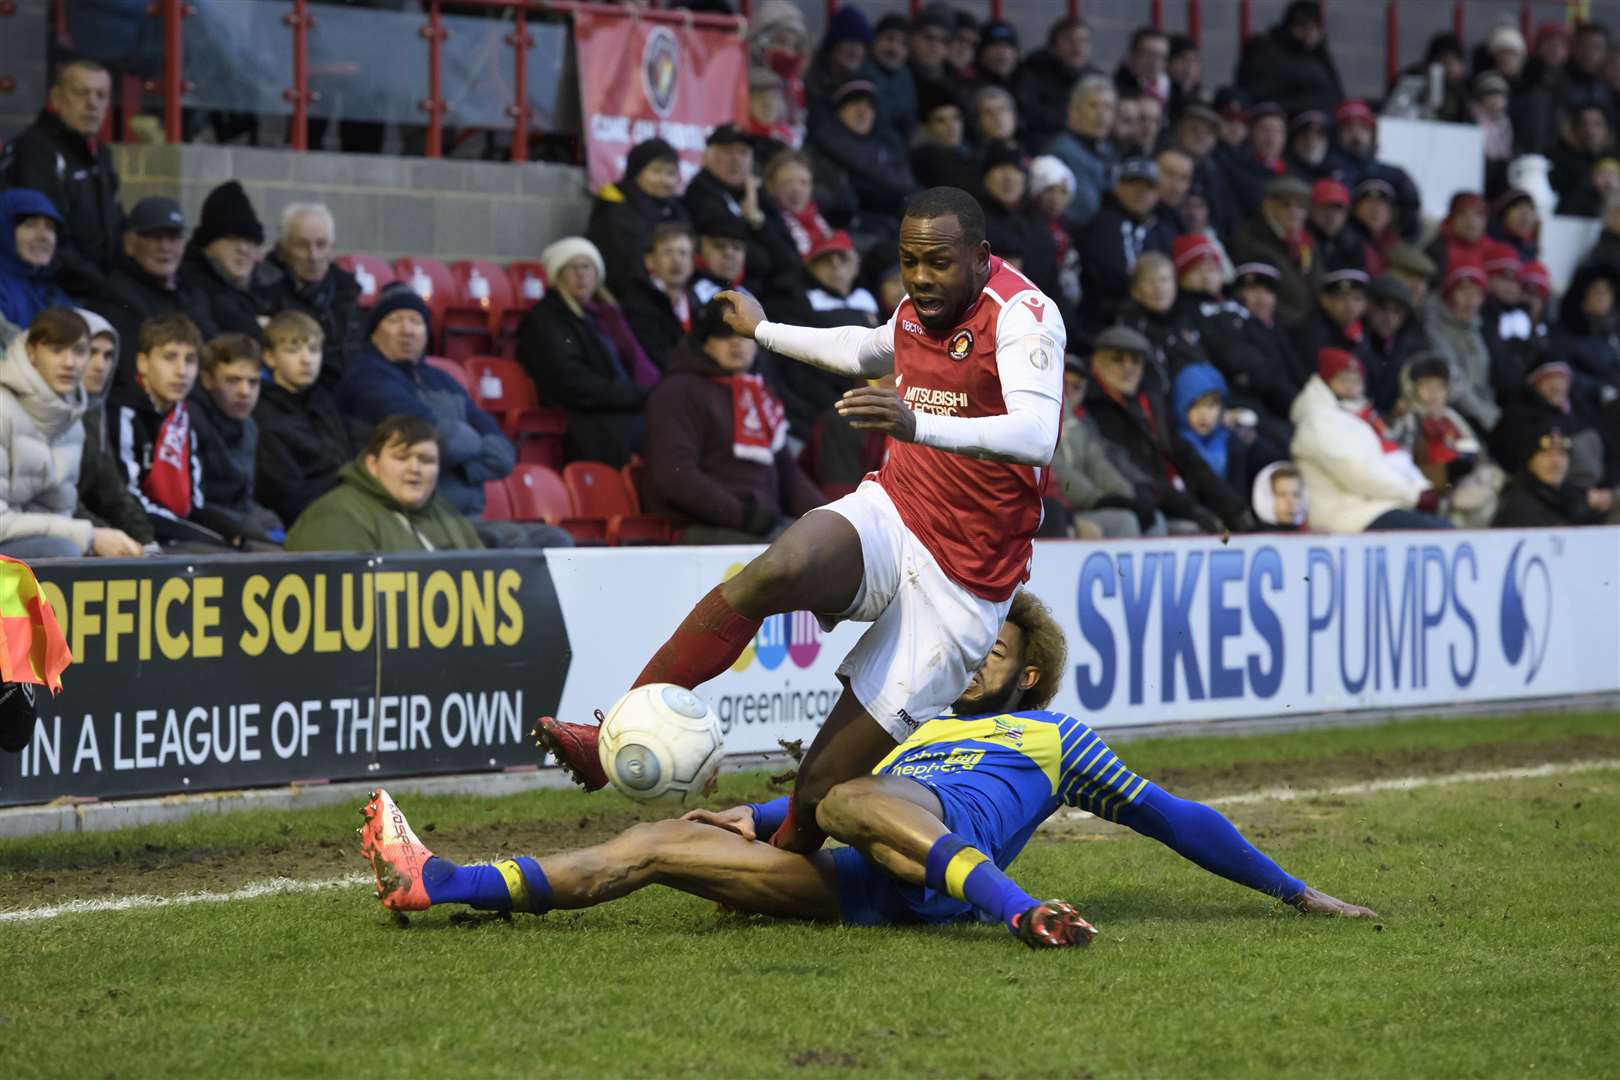 Myles Weston playing for Ebbsfleet United Picture: Andy Payton